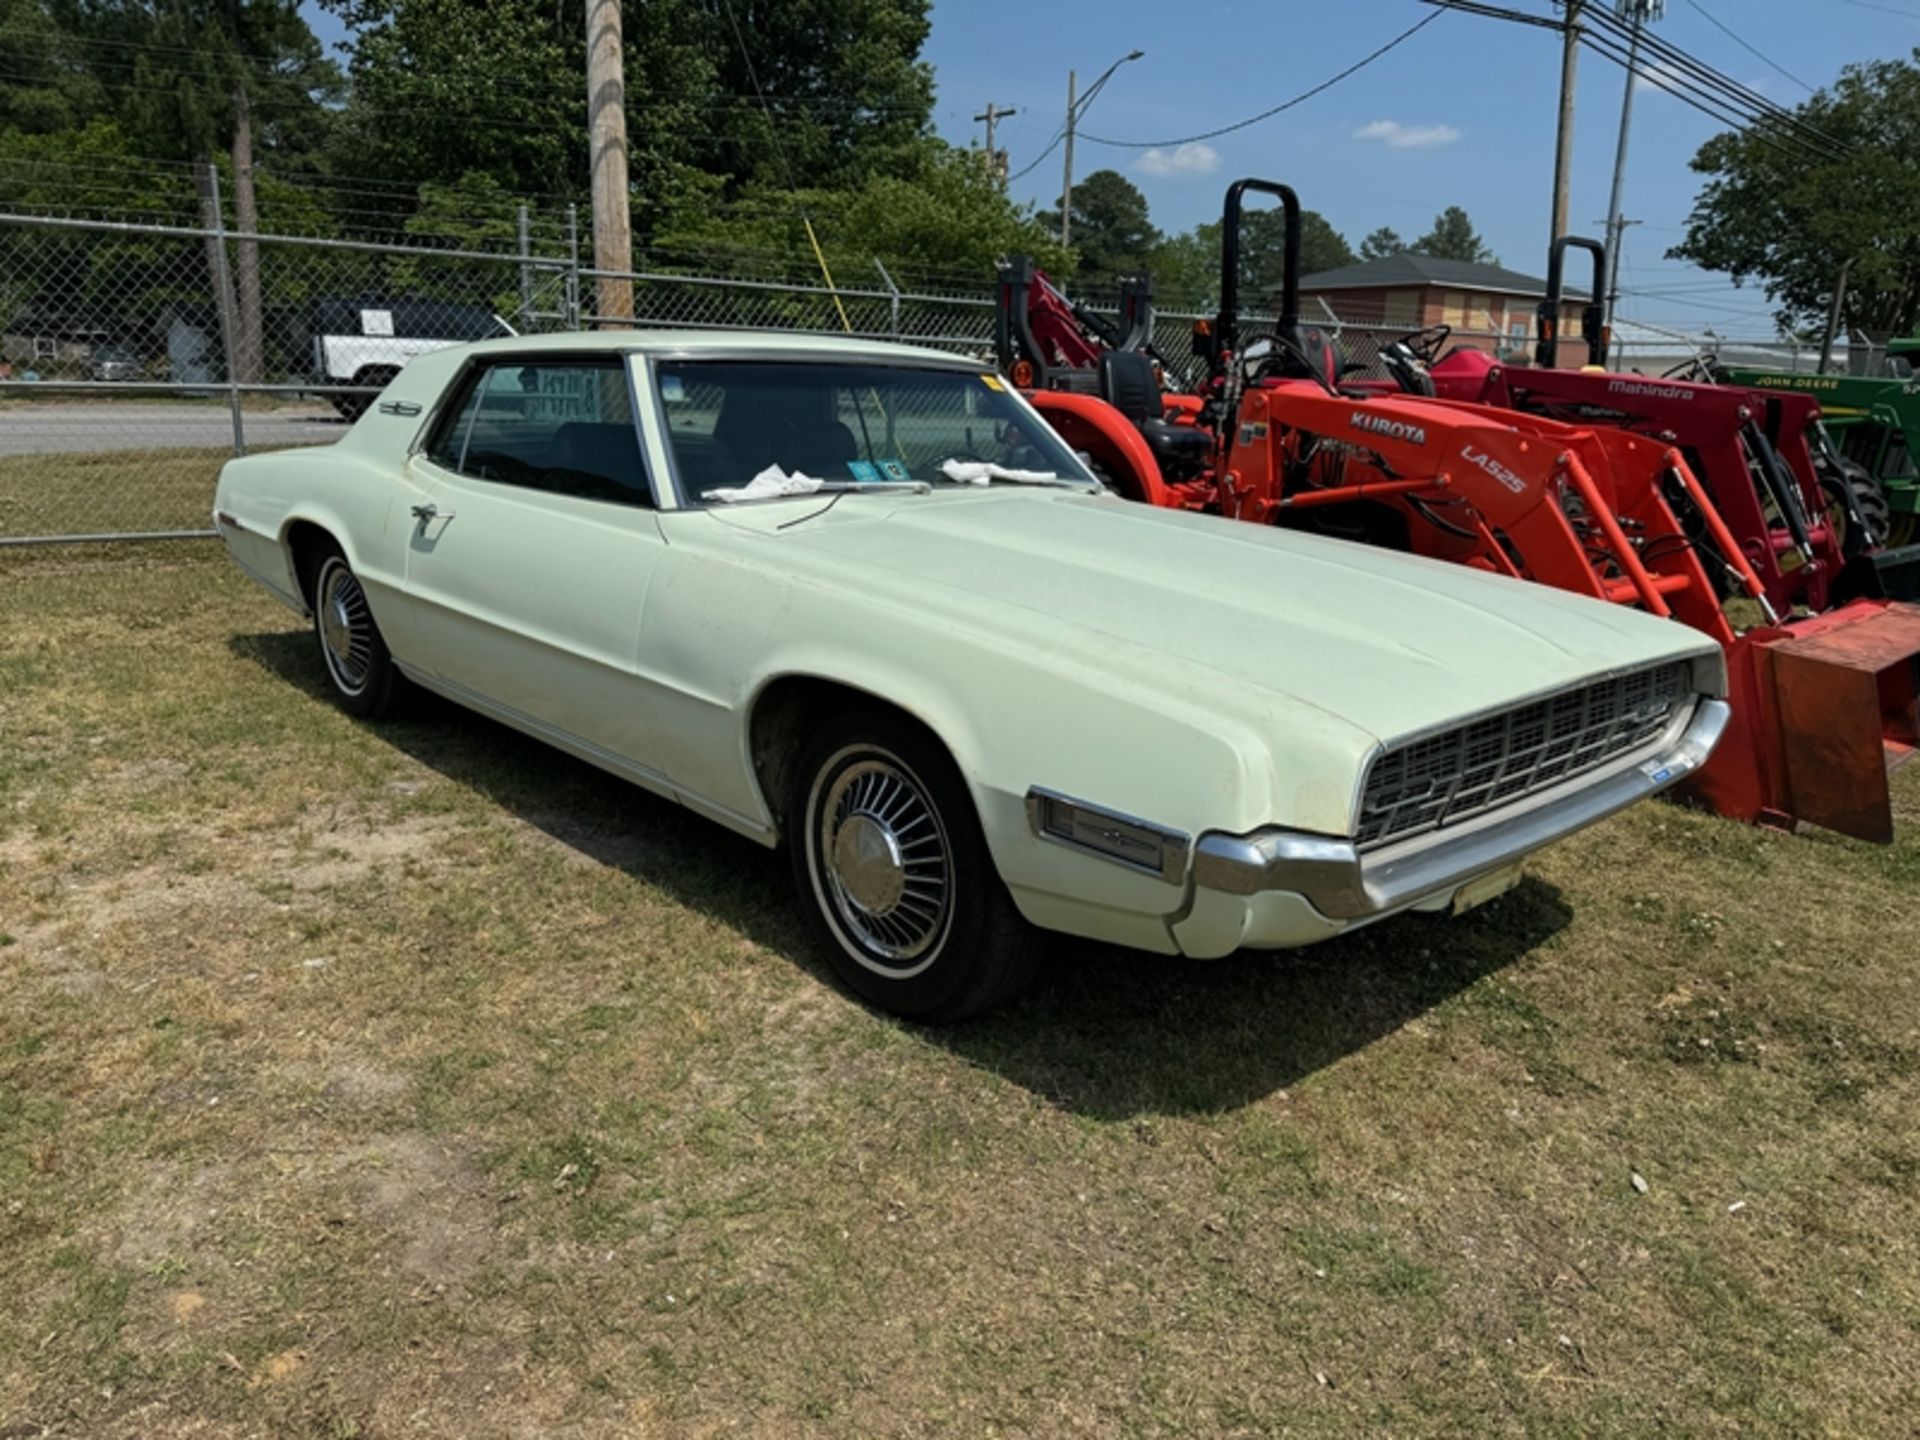 1968 FORD Thunderbird with Thunder Jet 429 engine - mileage unknown - 8Y83N128382 - Image 2 of 7